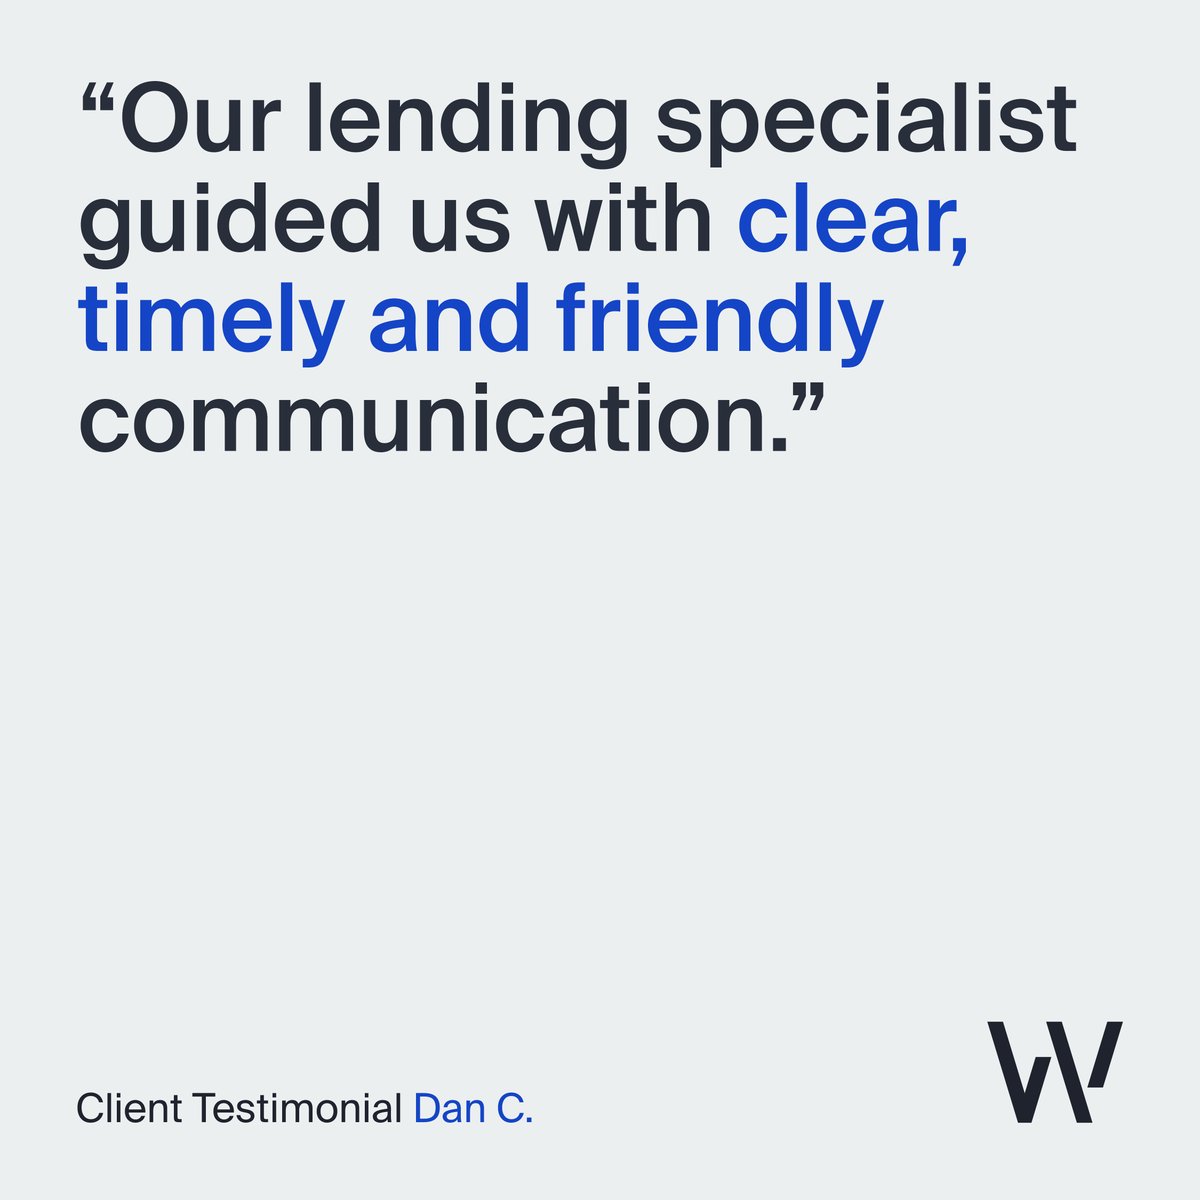 Expect nothing less but clear, timely and friendly communication at all times - because you don't want to feel left in the dark with your loan. WLTH is a digital, impact lender at your service.

#impact #communication #financialknowledge